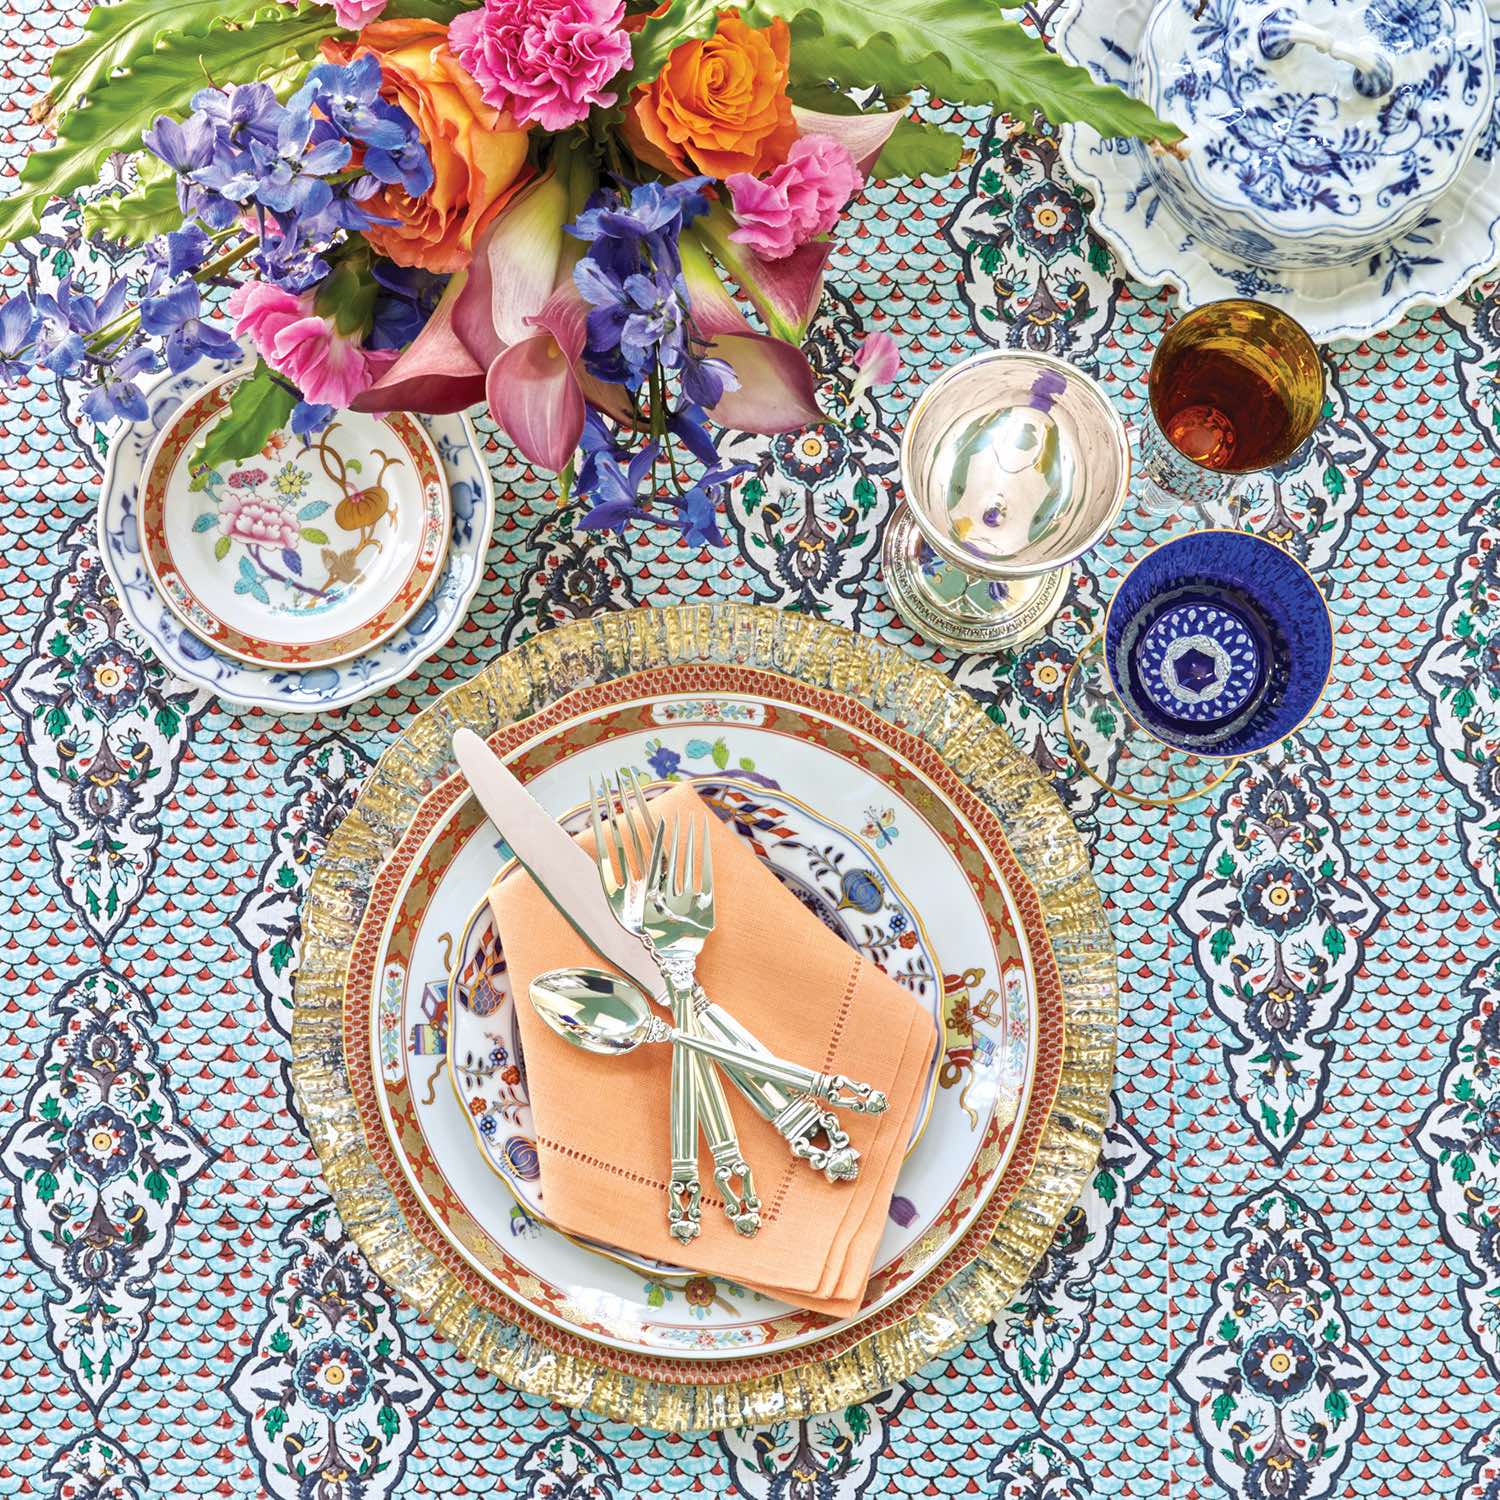 Table setting with rich hues, layered patterns, and metallic accents.